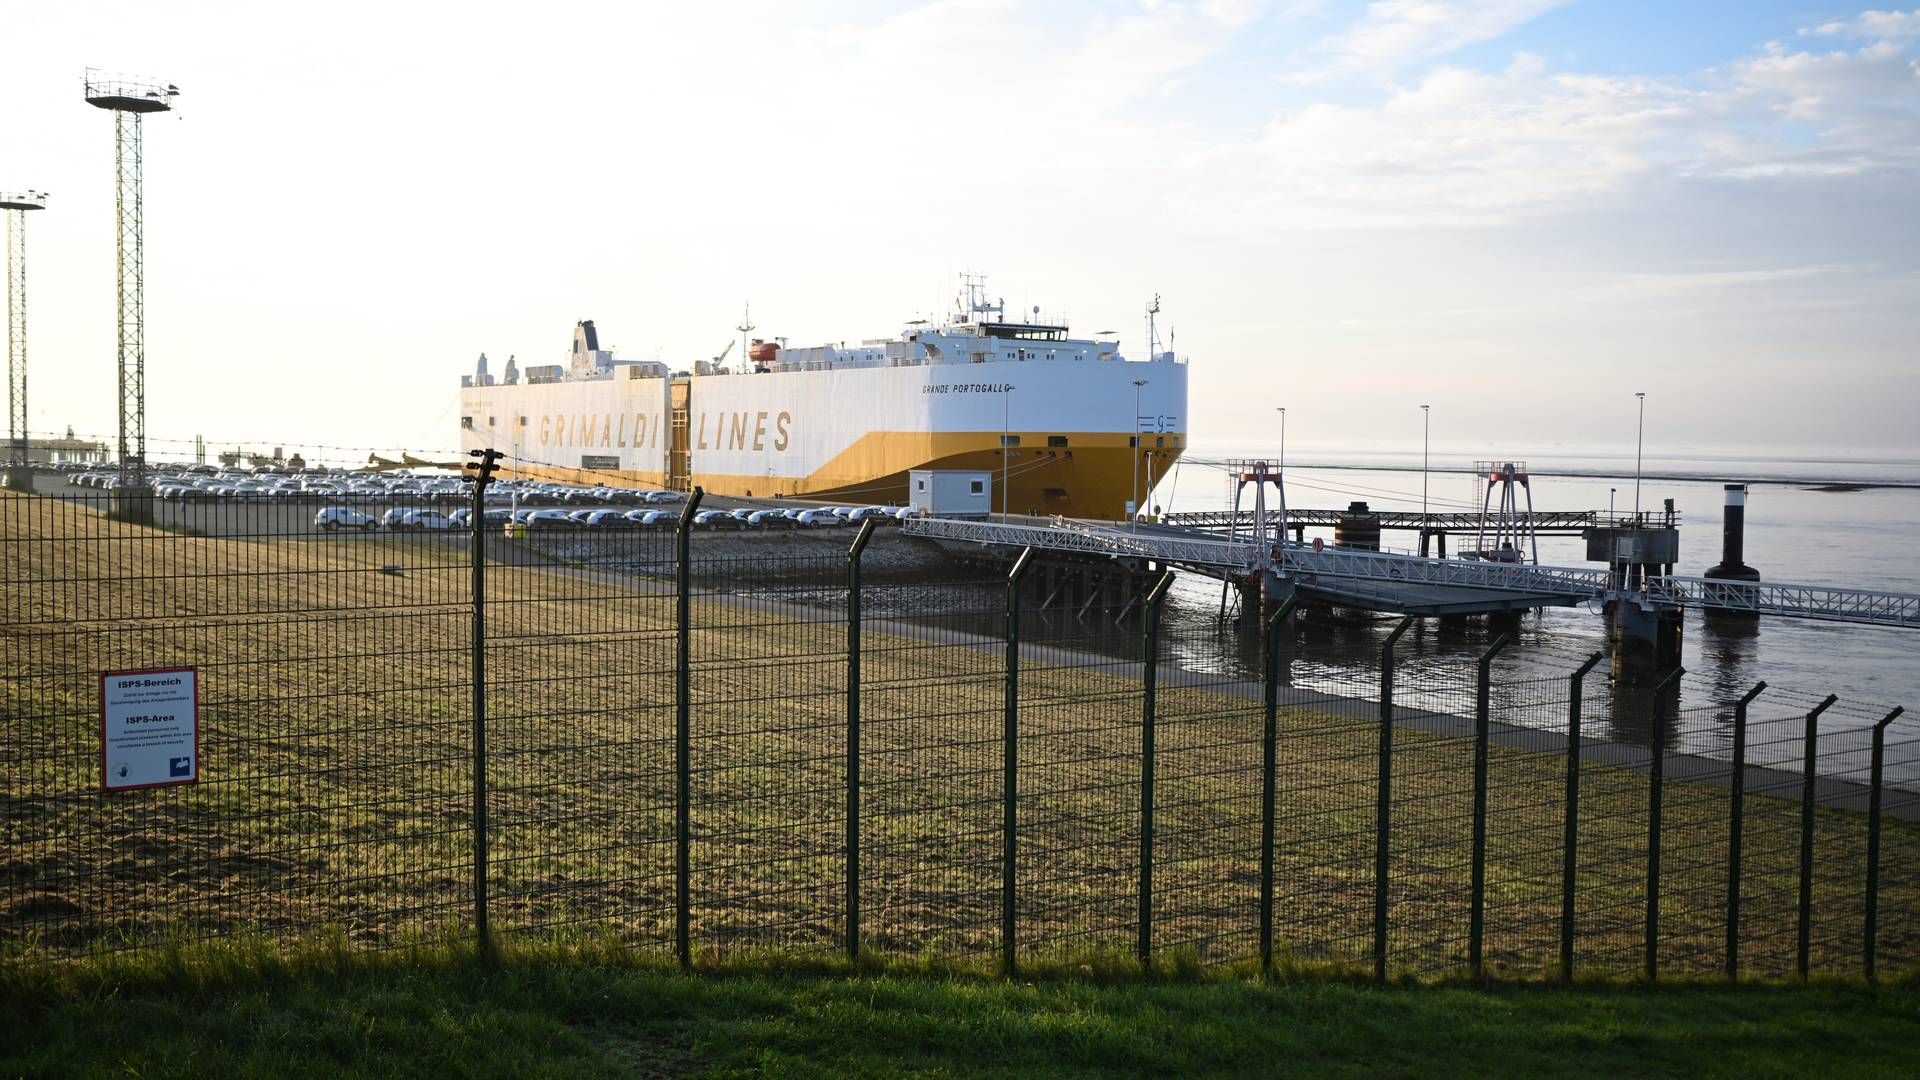 Car carrier in the Port of Emden, one of the ports in the German state of Lower Saxony, which fear that cost-cutting will slow down their development. | Photo: Lars Penning/AP/Ritzau Scanpix